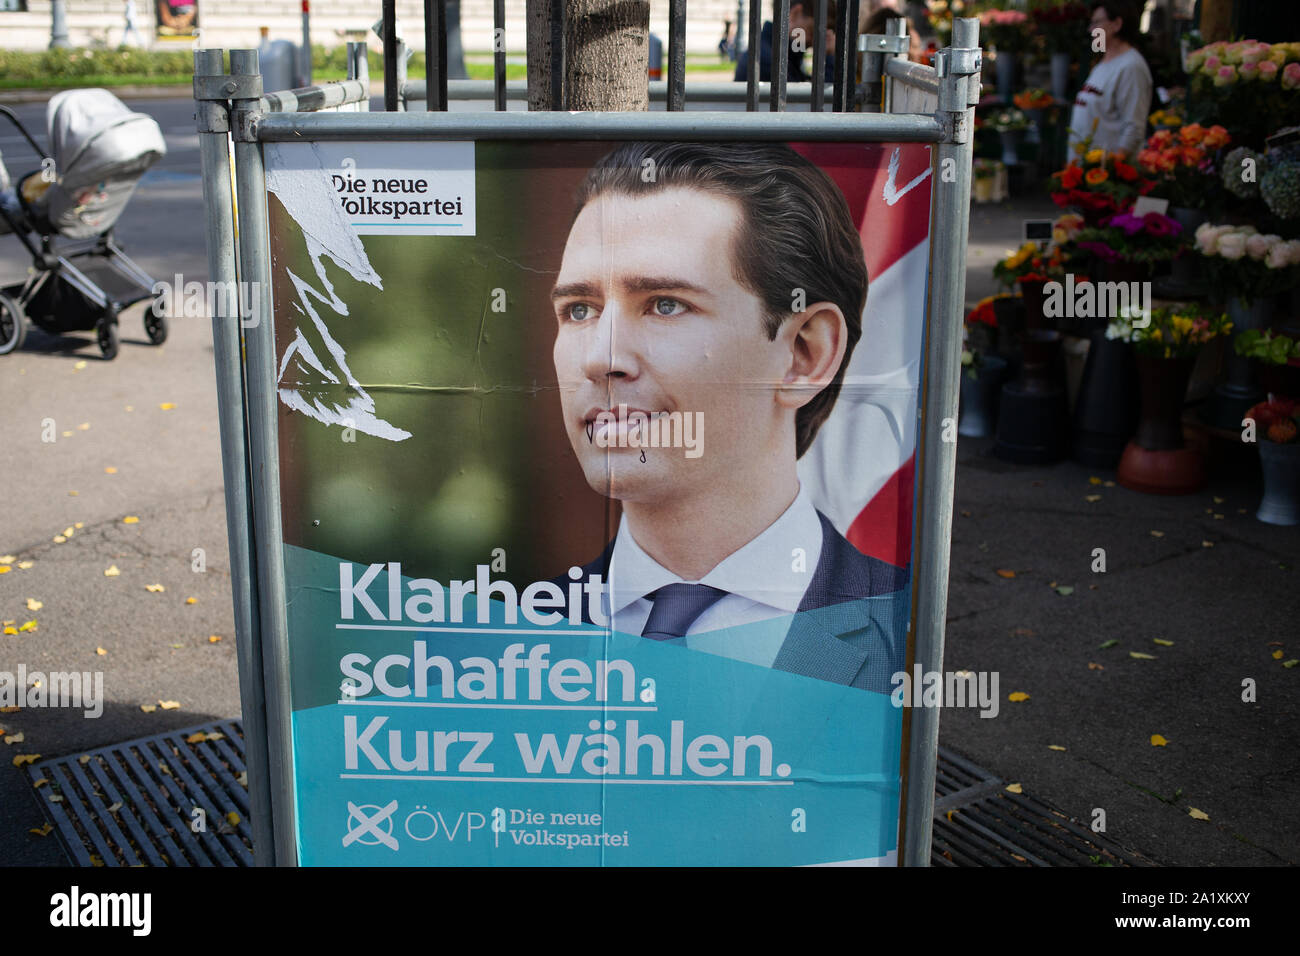 Defaced Campaign Poster during the Austrian Elections September 2019 of Sebastian Kurz, leader of the Austrian People's Party/Österreichische Volkspartei/ÖVP Stock Photo